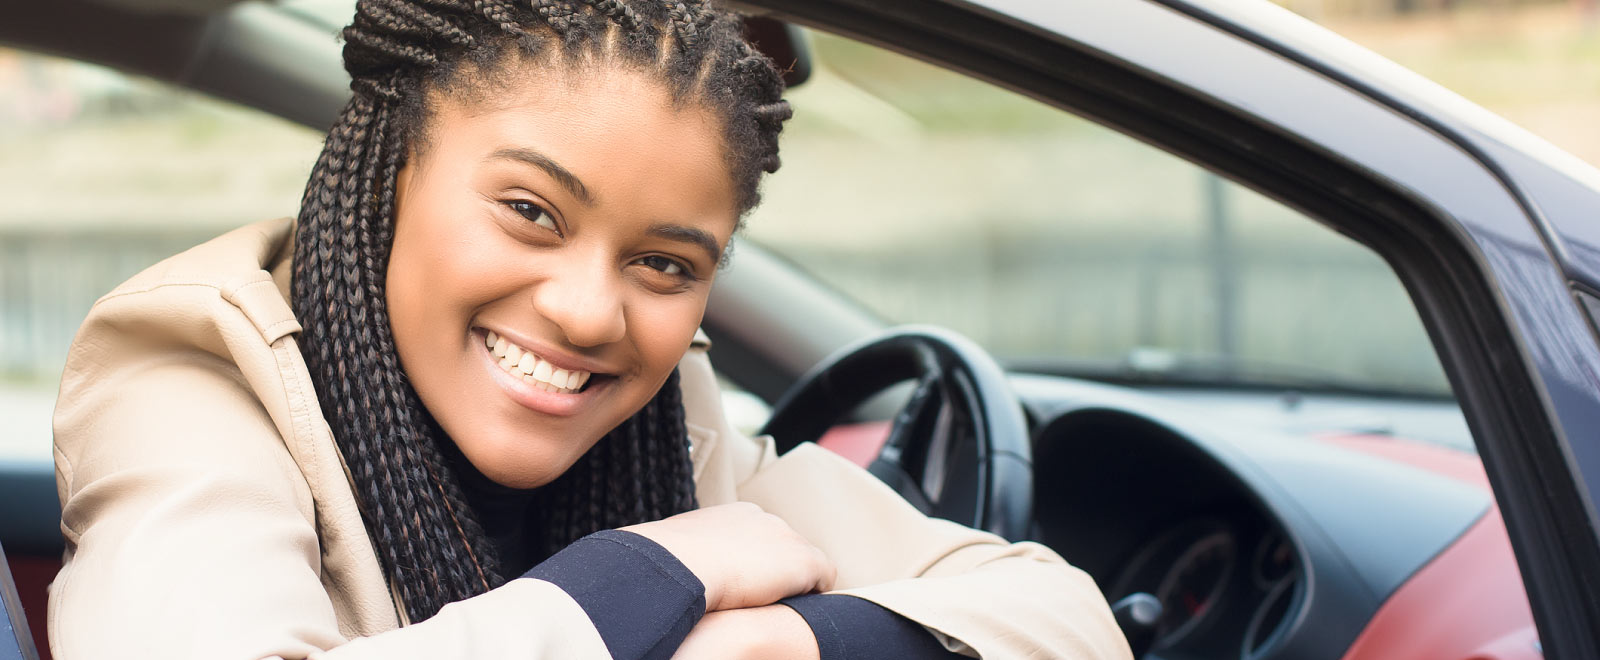 woman sitting in car smiling